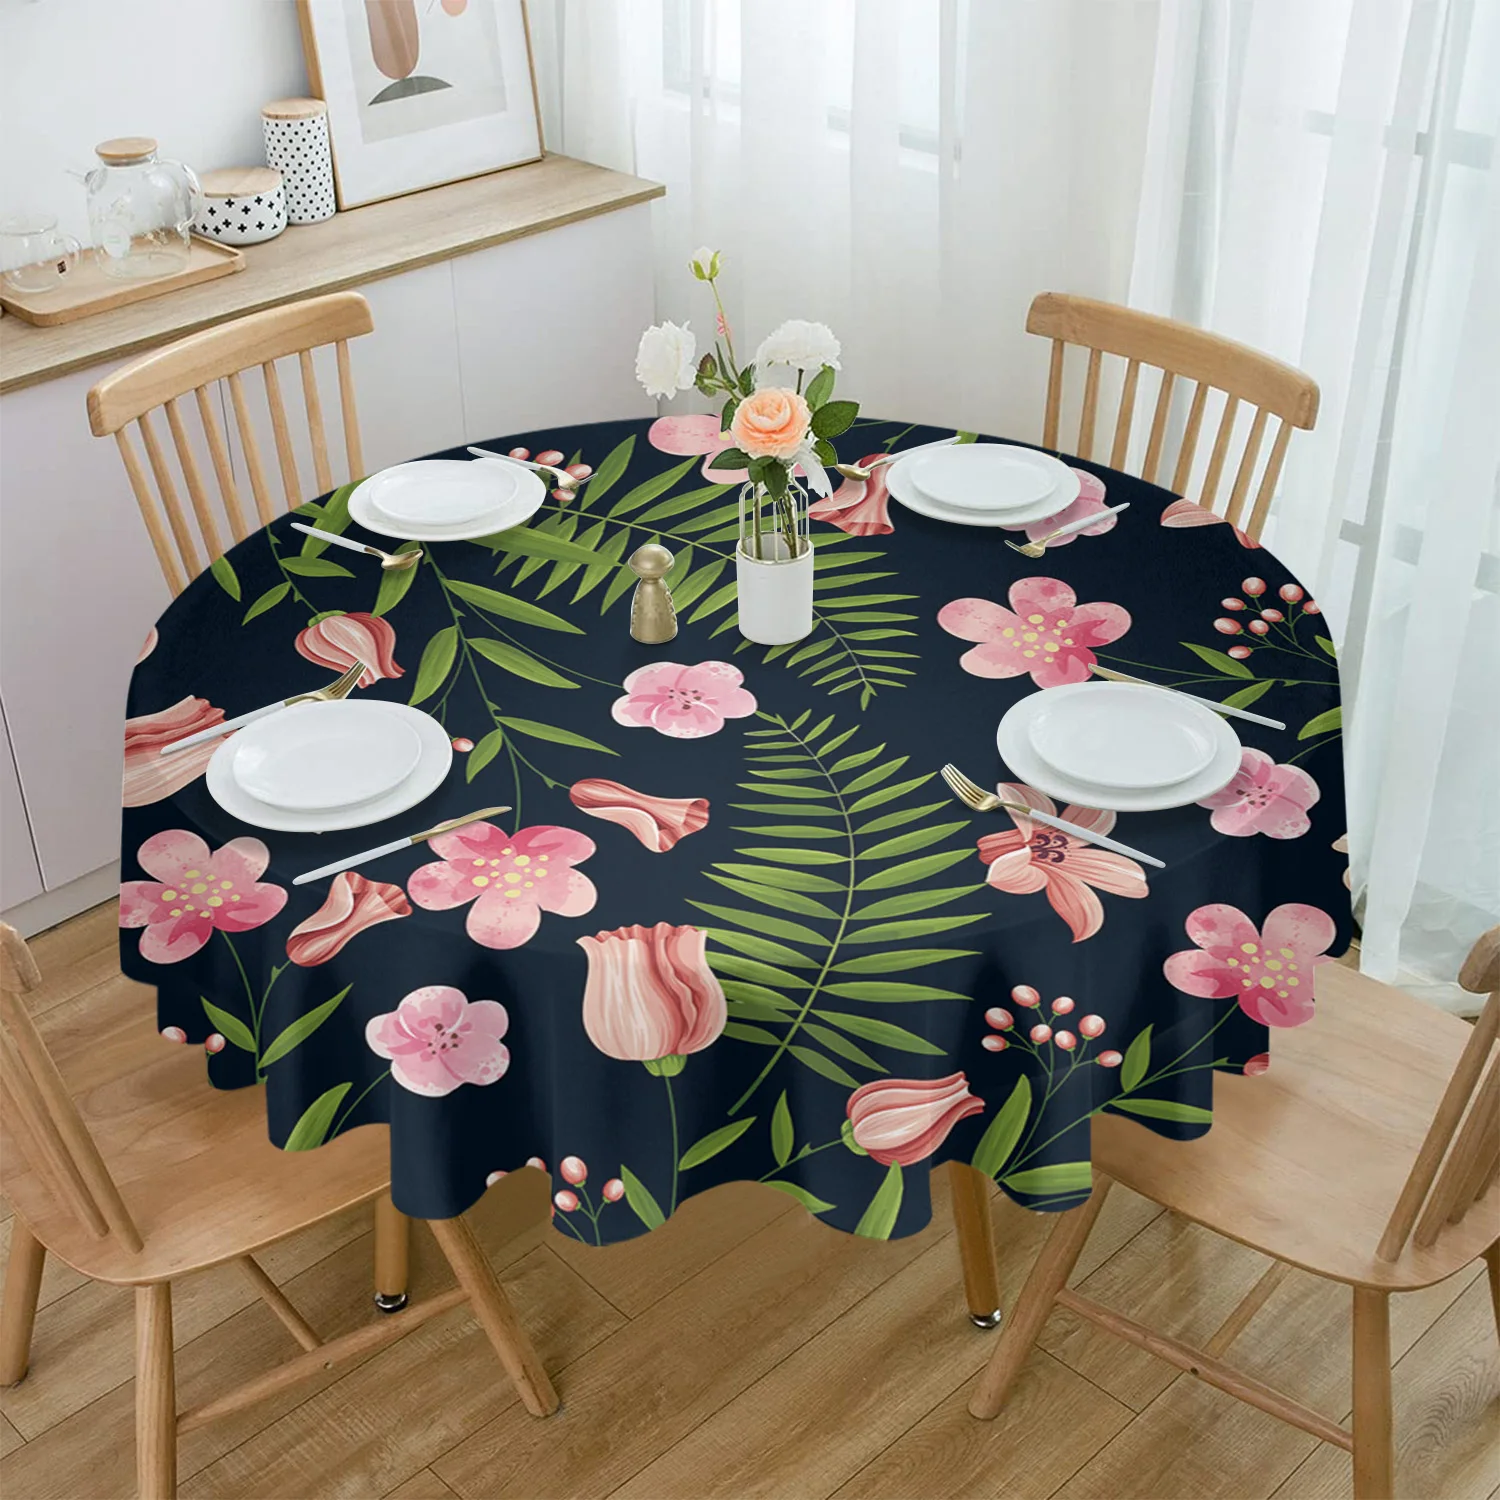 

Foliage Flowers Round Table Cloth Festival Dining Waterproof Tablecloth Table Cover for Wedding Party Decor Coffee Picnic Mat